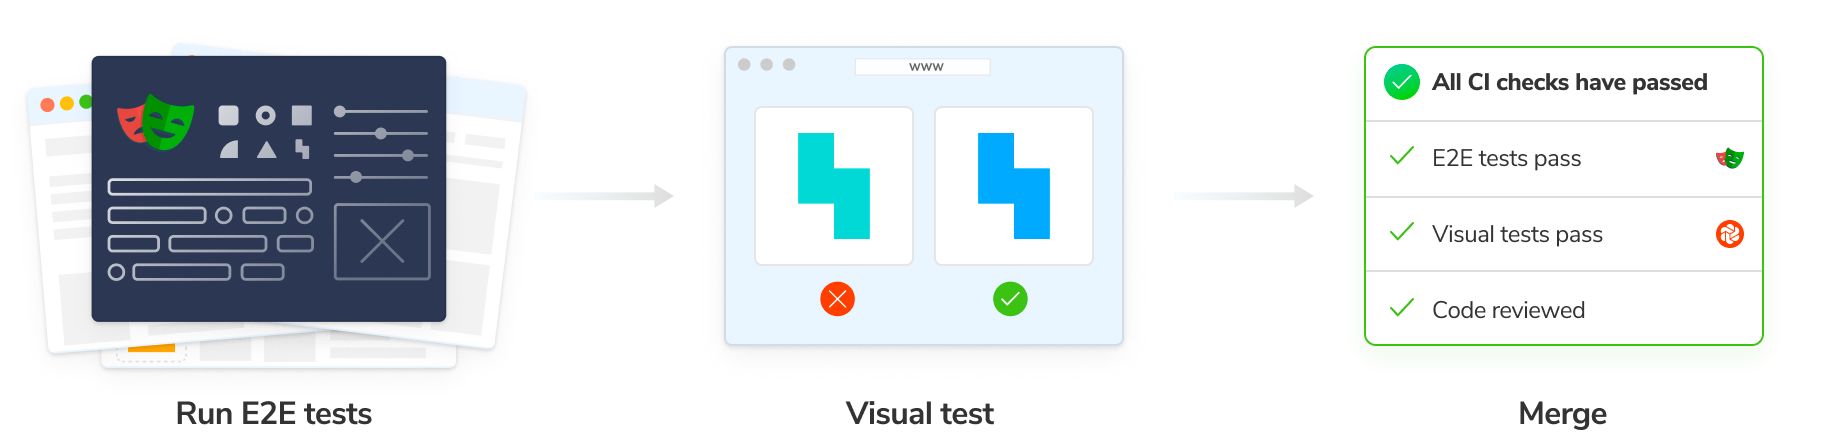 Graphic illustrating a 3-step process, labeled "Run E2E tests", "Visual test", and "Merge".